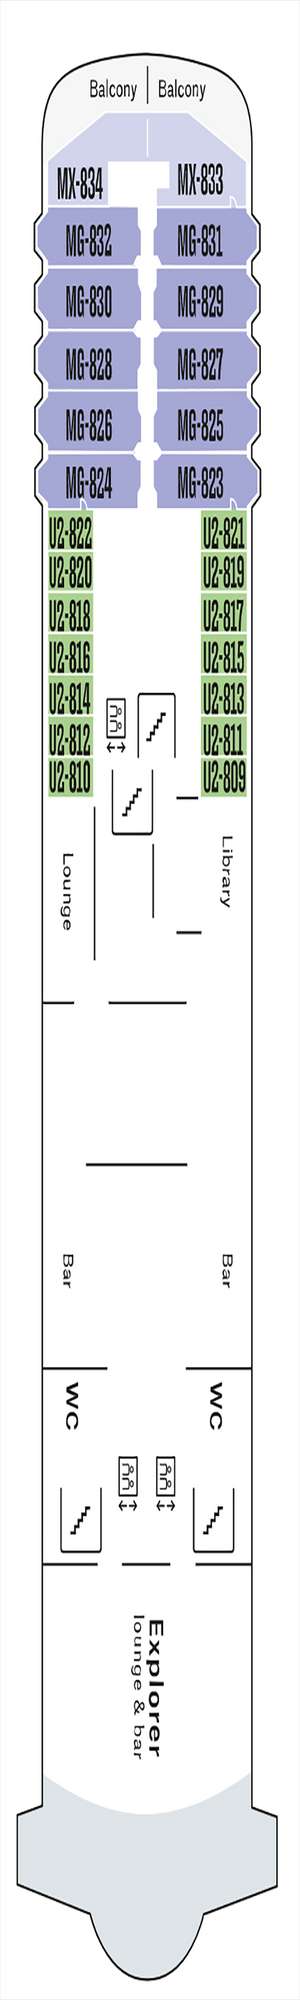 Deck plan for MS Maud